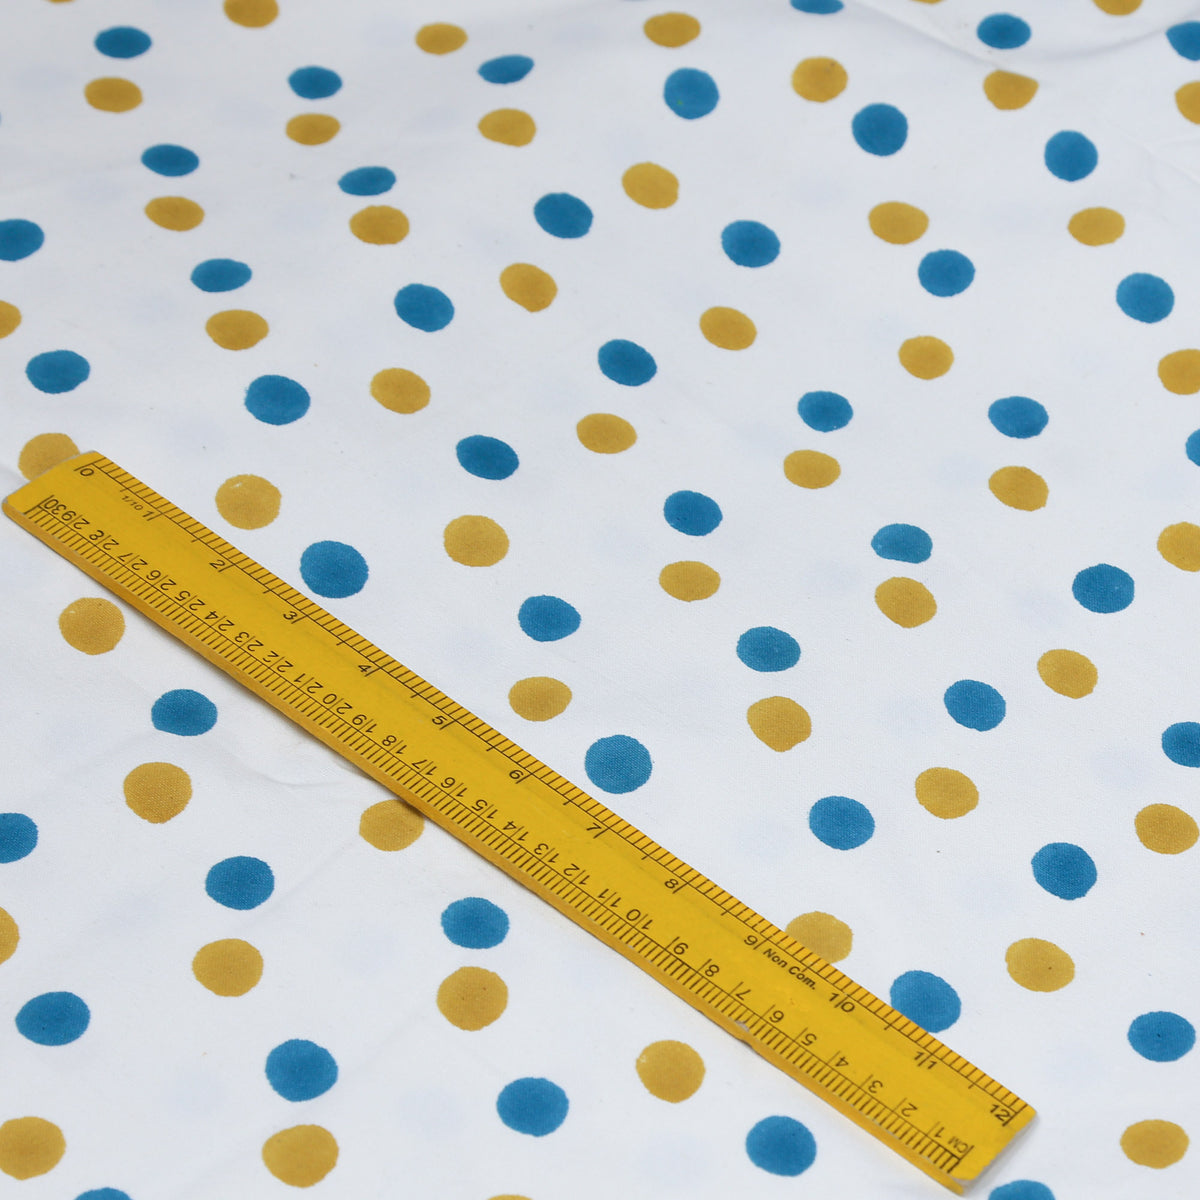 Cotton Canvas Fabric - White Base Blue And Yellow Polka Dot